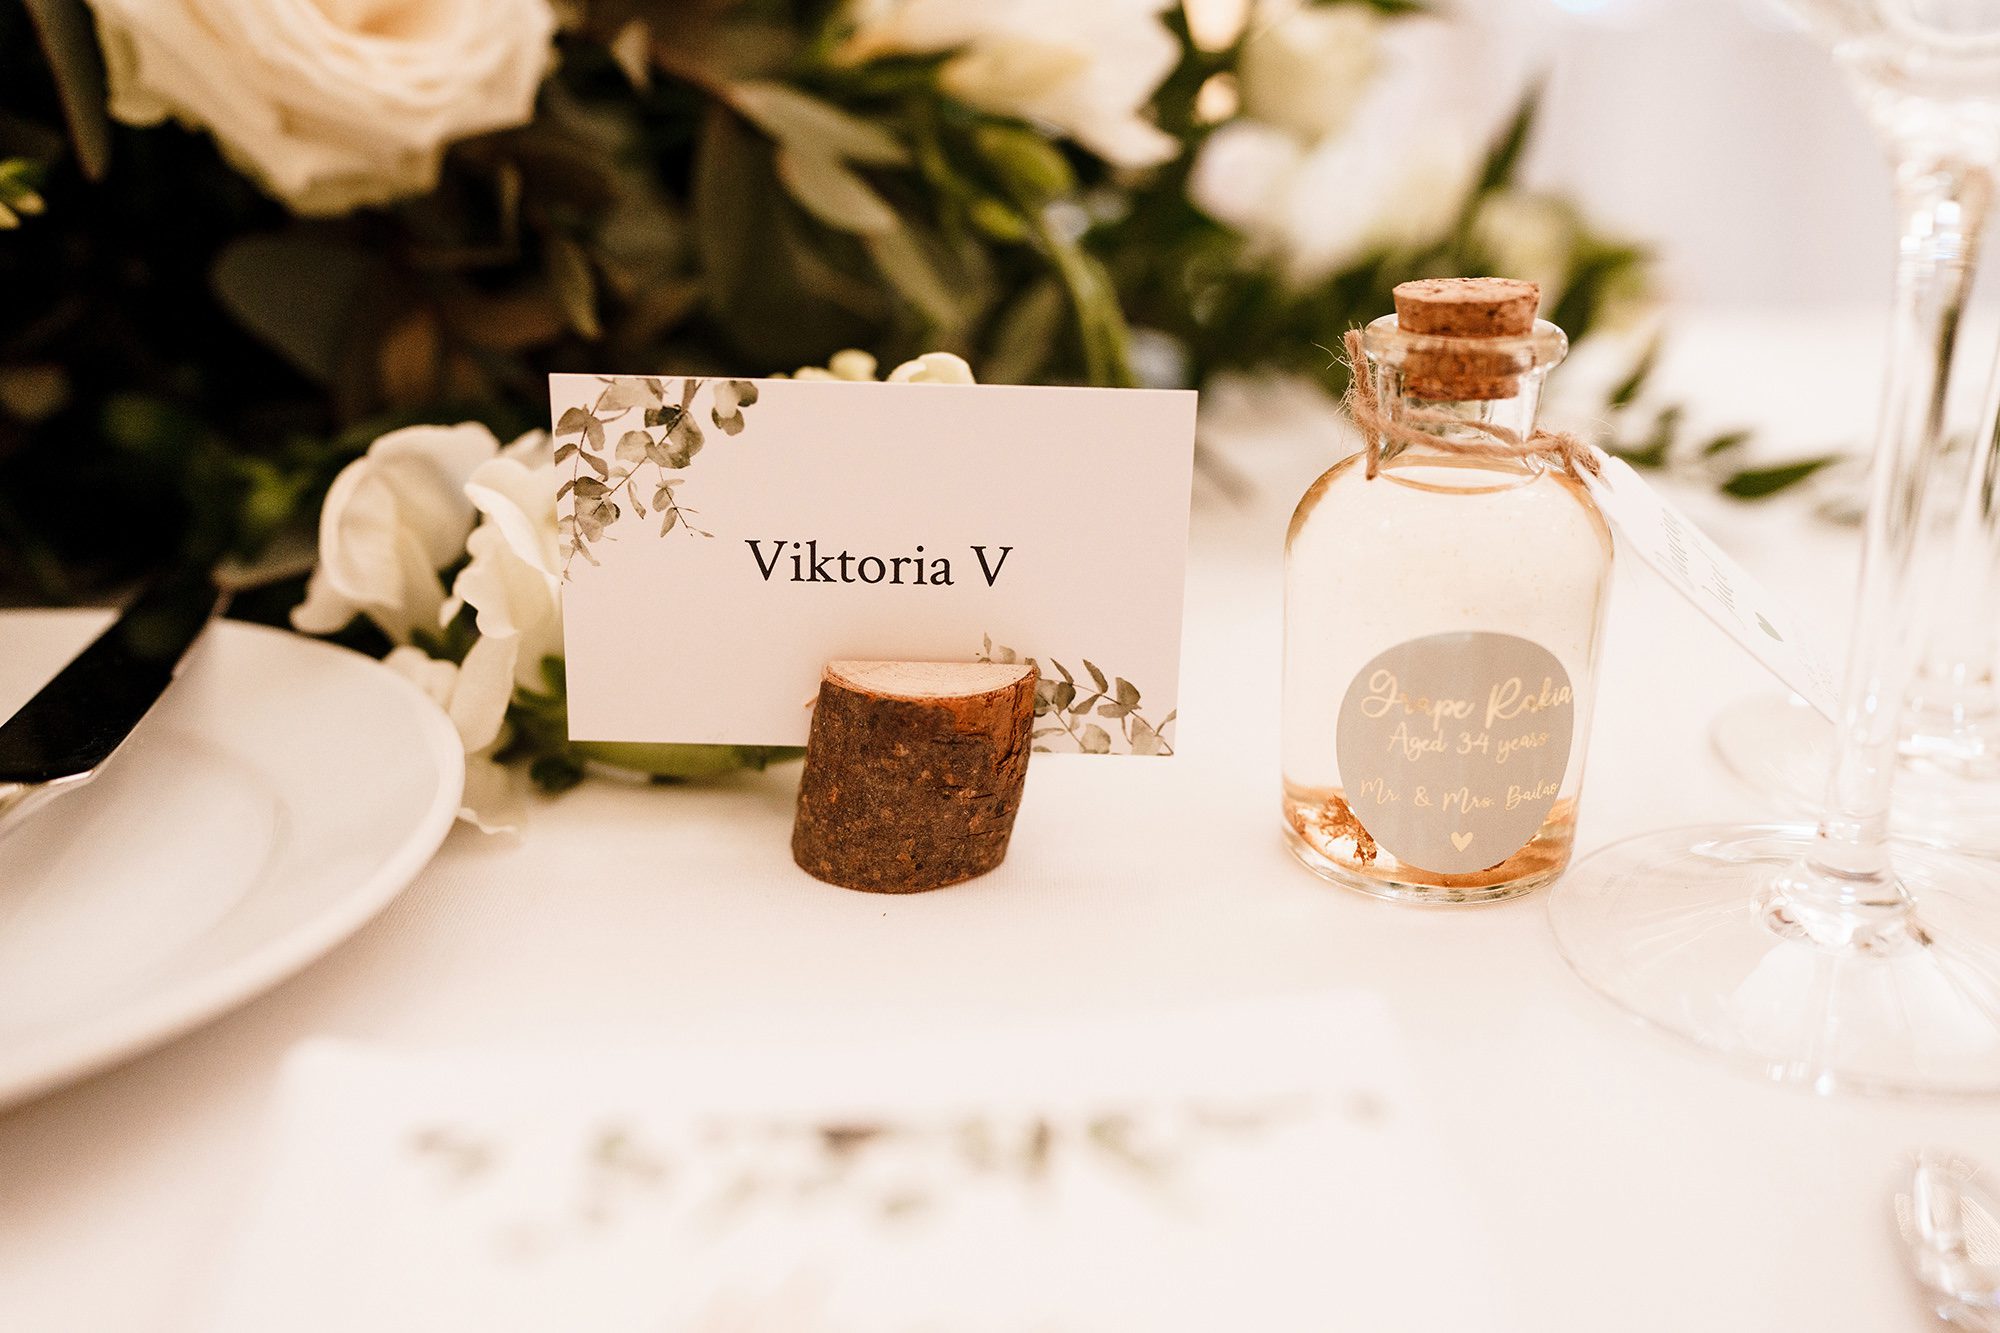 close up of wedding name card on table